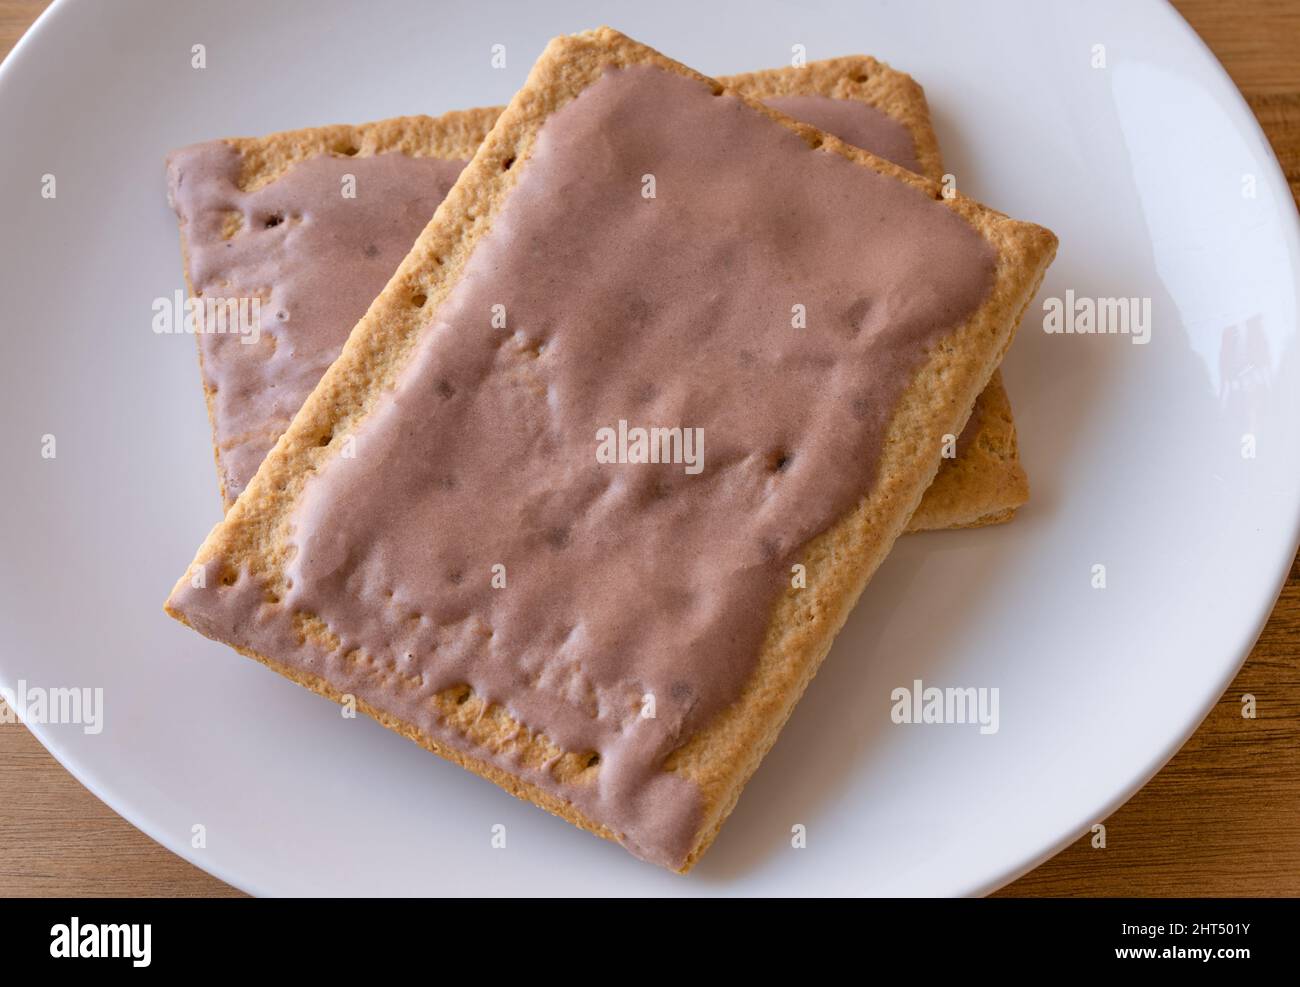 Chocolate Frosted Toaster Pastries Stock Photo